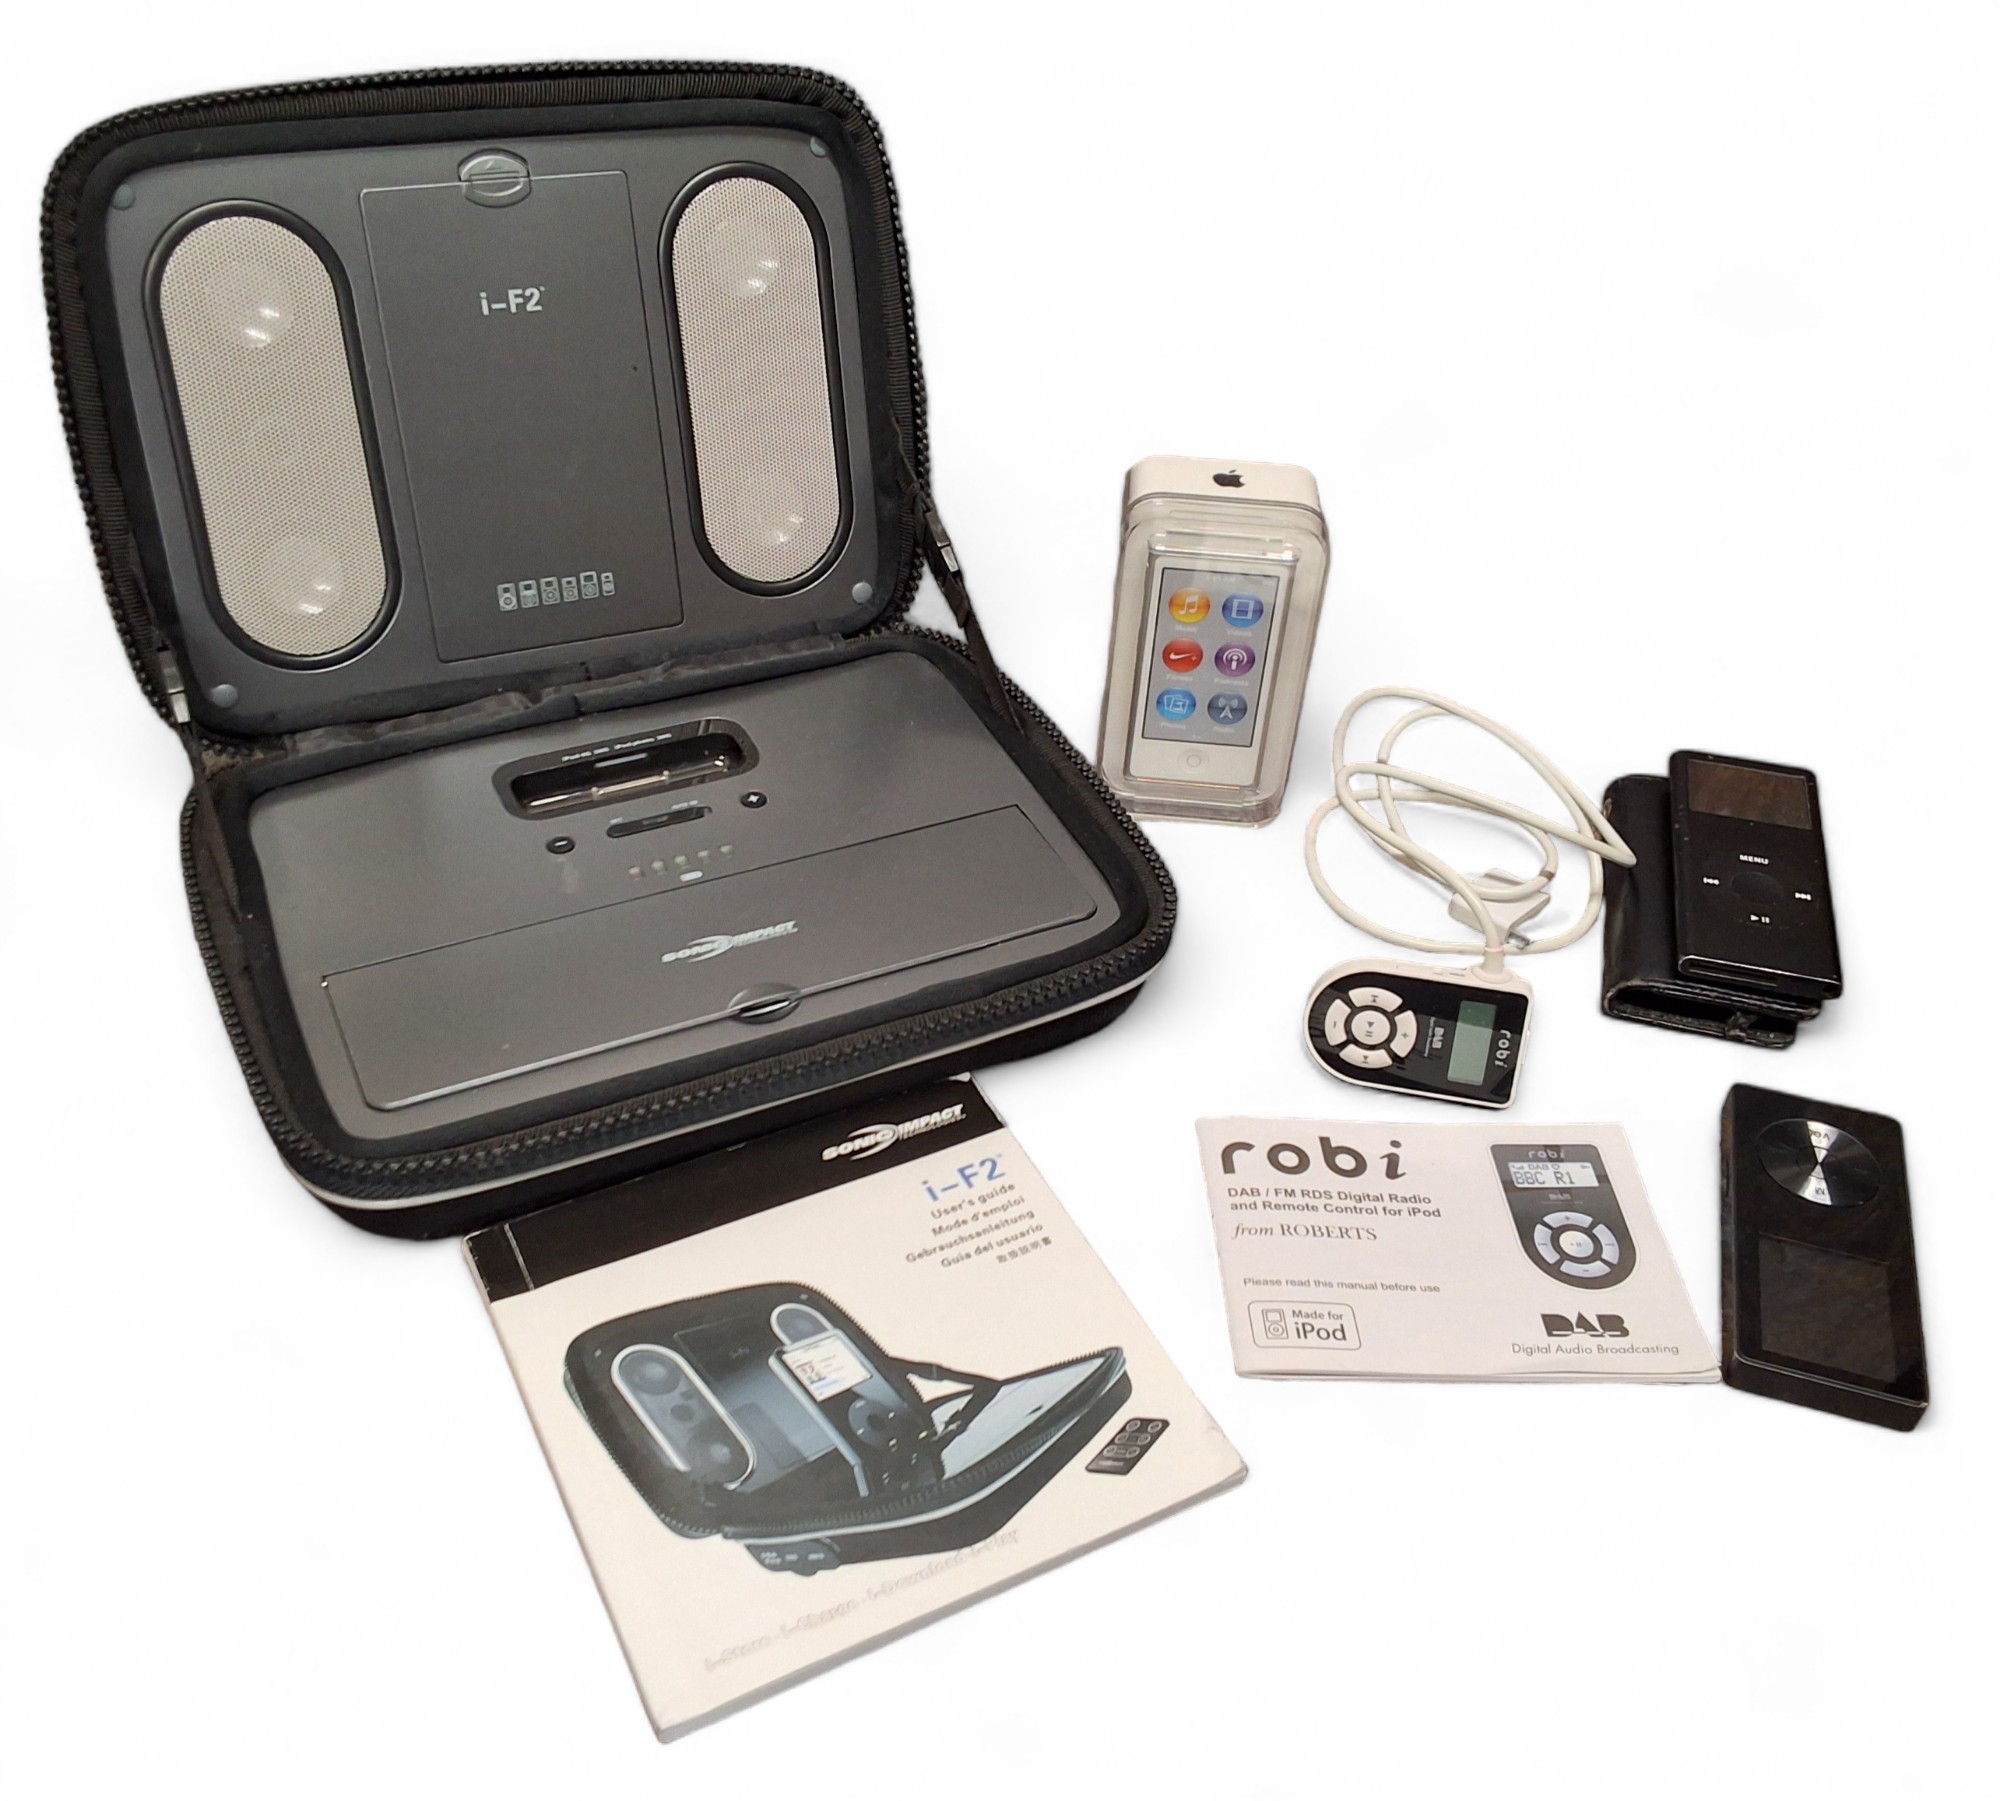 A 16gb iPod Nano, white & silver, unused, in original box complete with headphones, power cable &